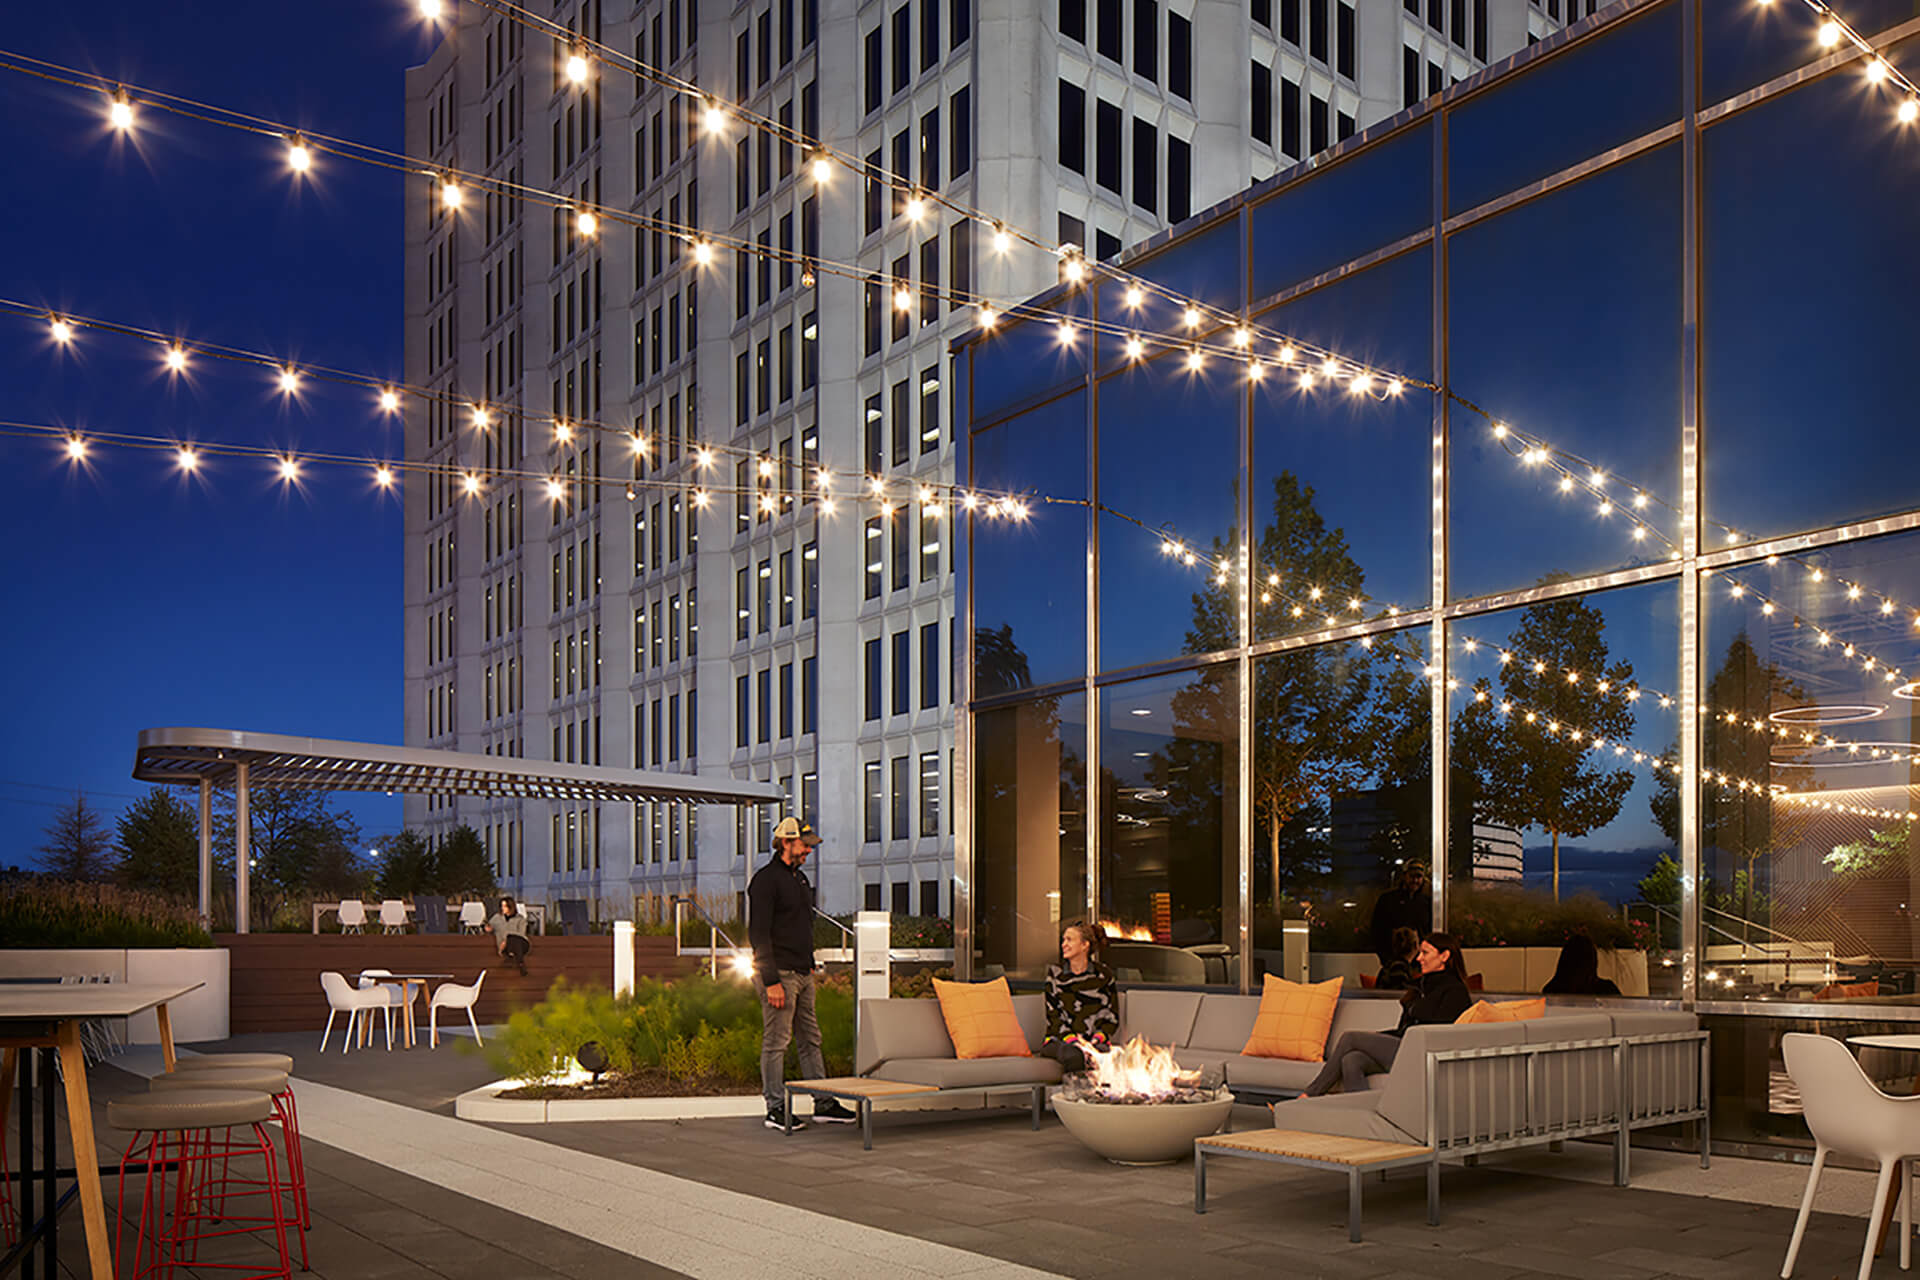 An outdoor patio area at Continental Towers with string lights and a fire pit.